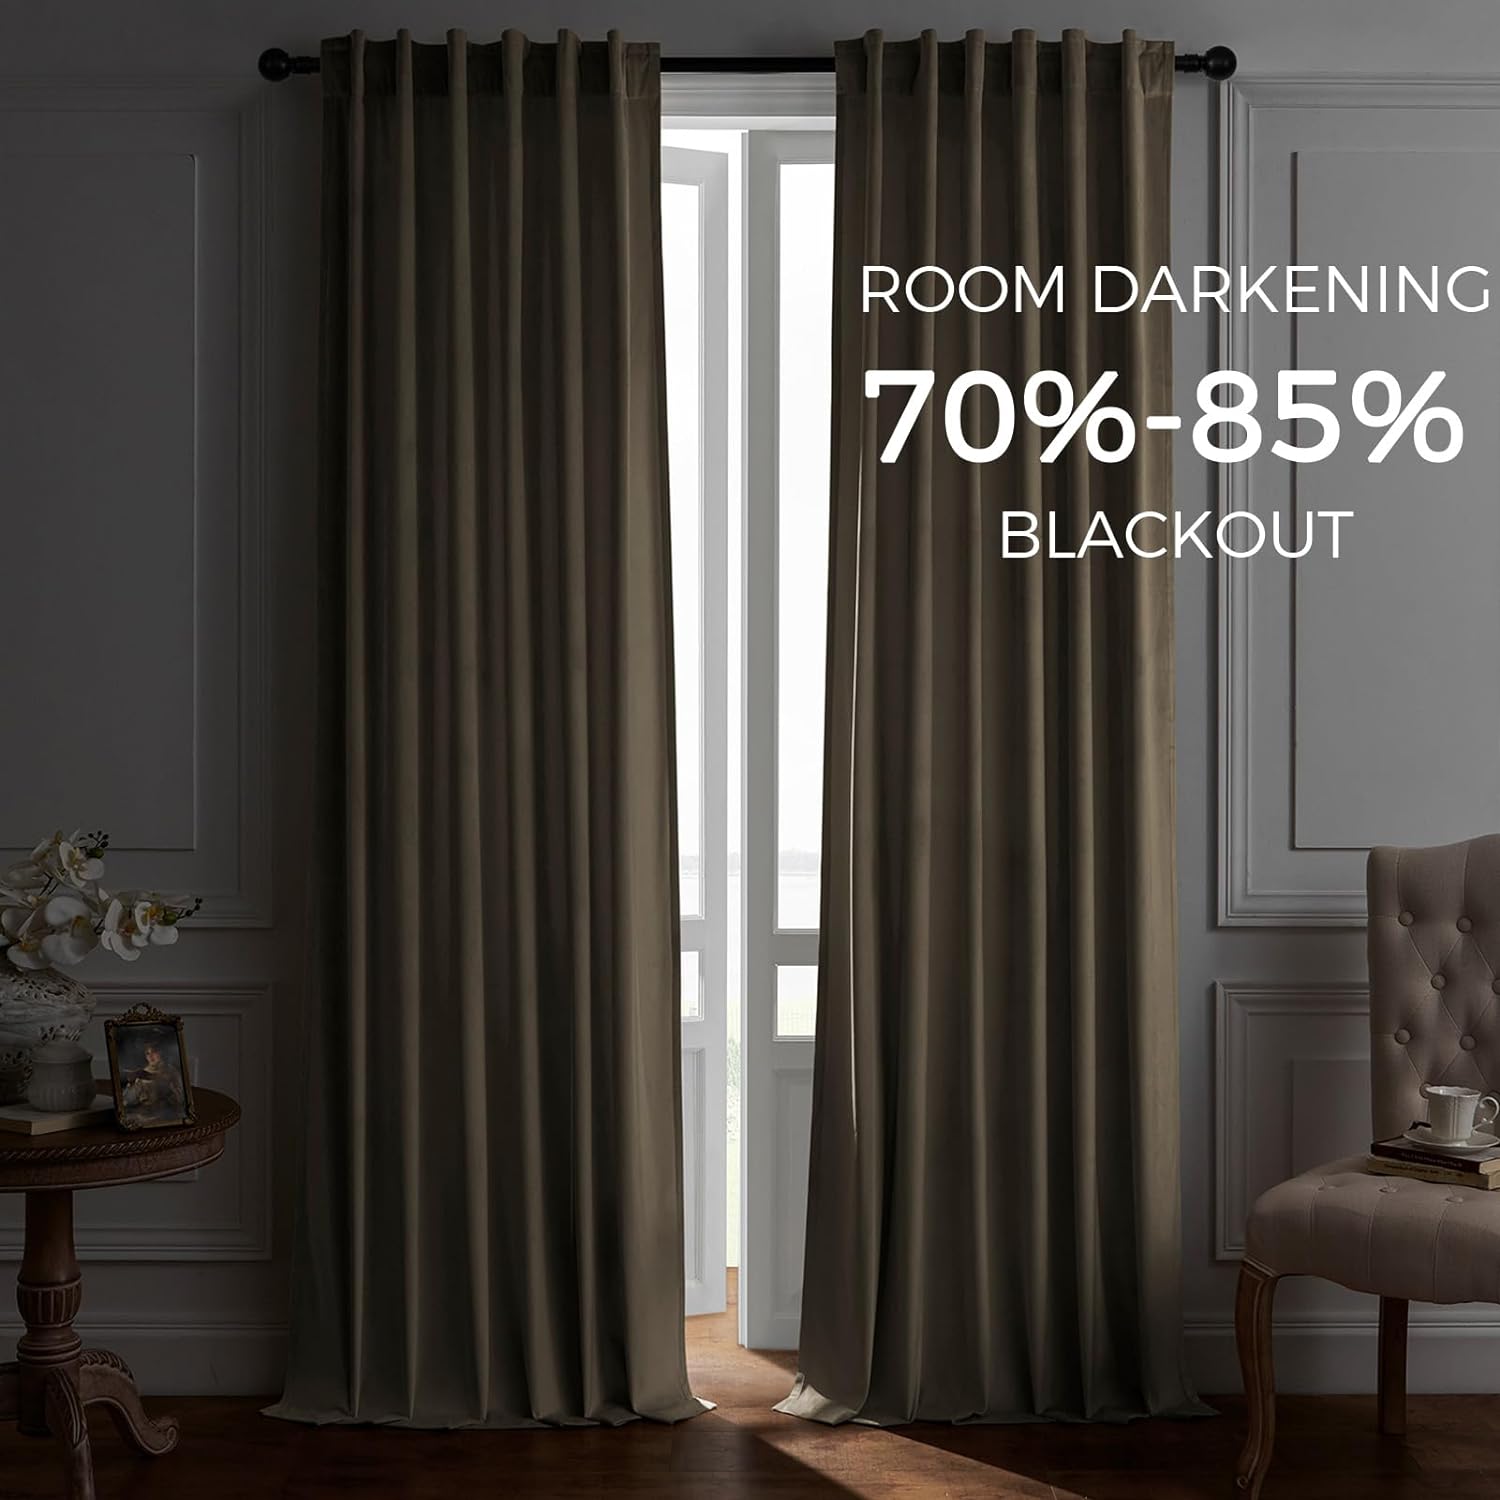 Topfinel Natural Blackout Velvet Curtains for Bedroom 108 Inches Length 2 Panels Set Thermal Insulated Noise Reducing Energy Saving Drapes for Living Room 108 Inches Long,9FT 2 Panels Burg,Beige